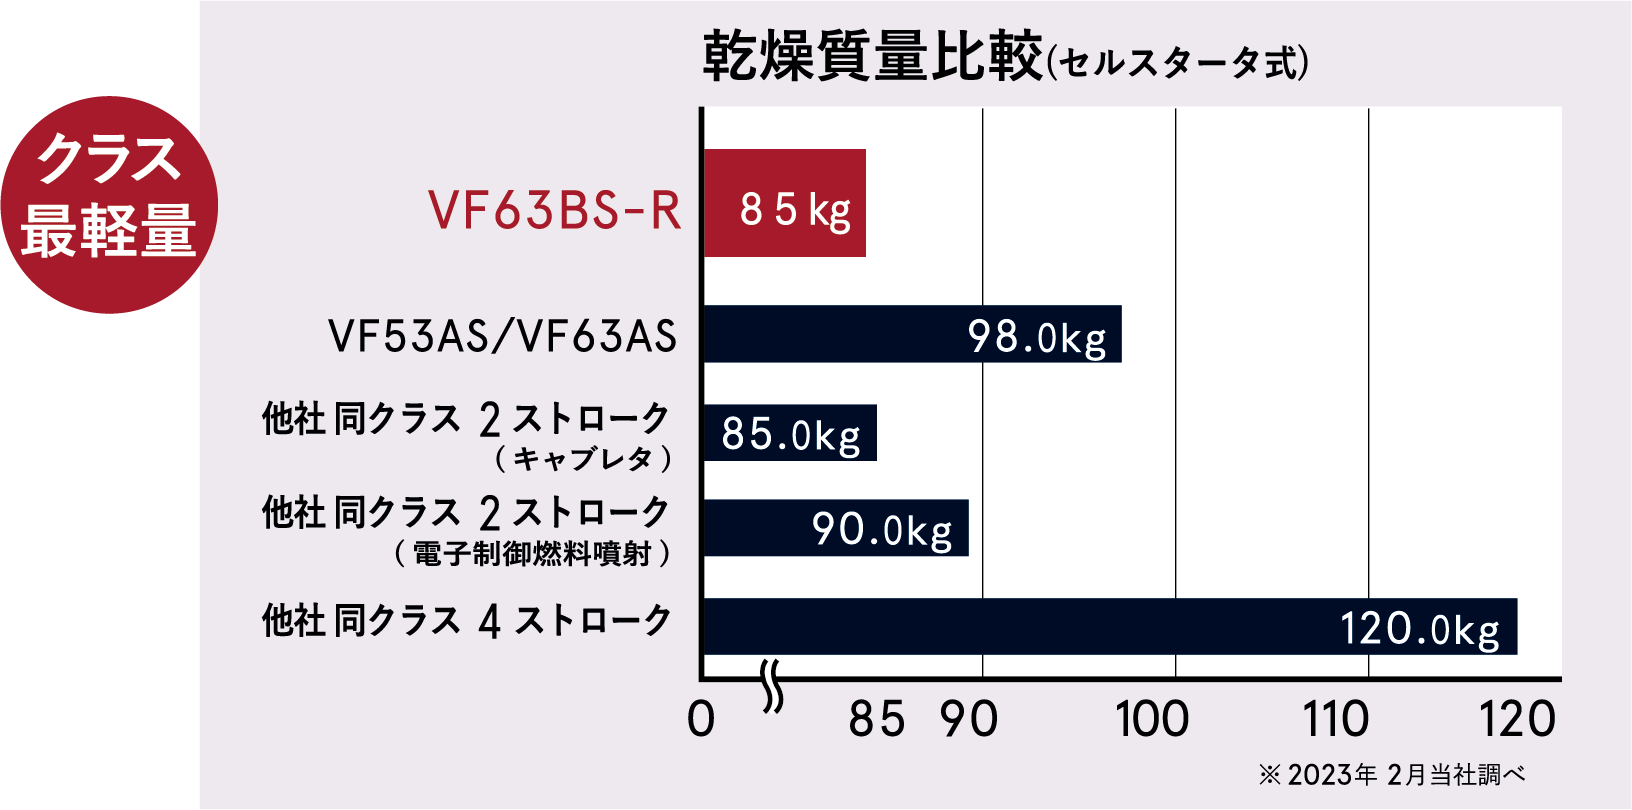 VF63BS-R-最軽量グラフ.png